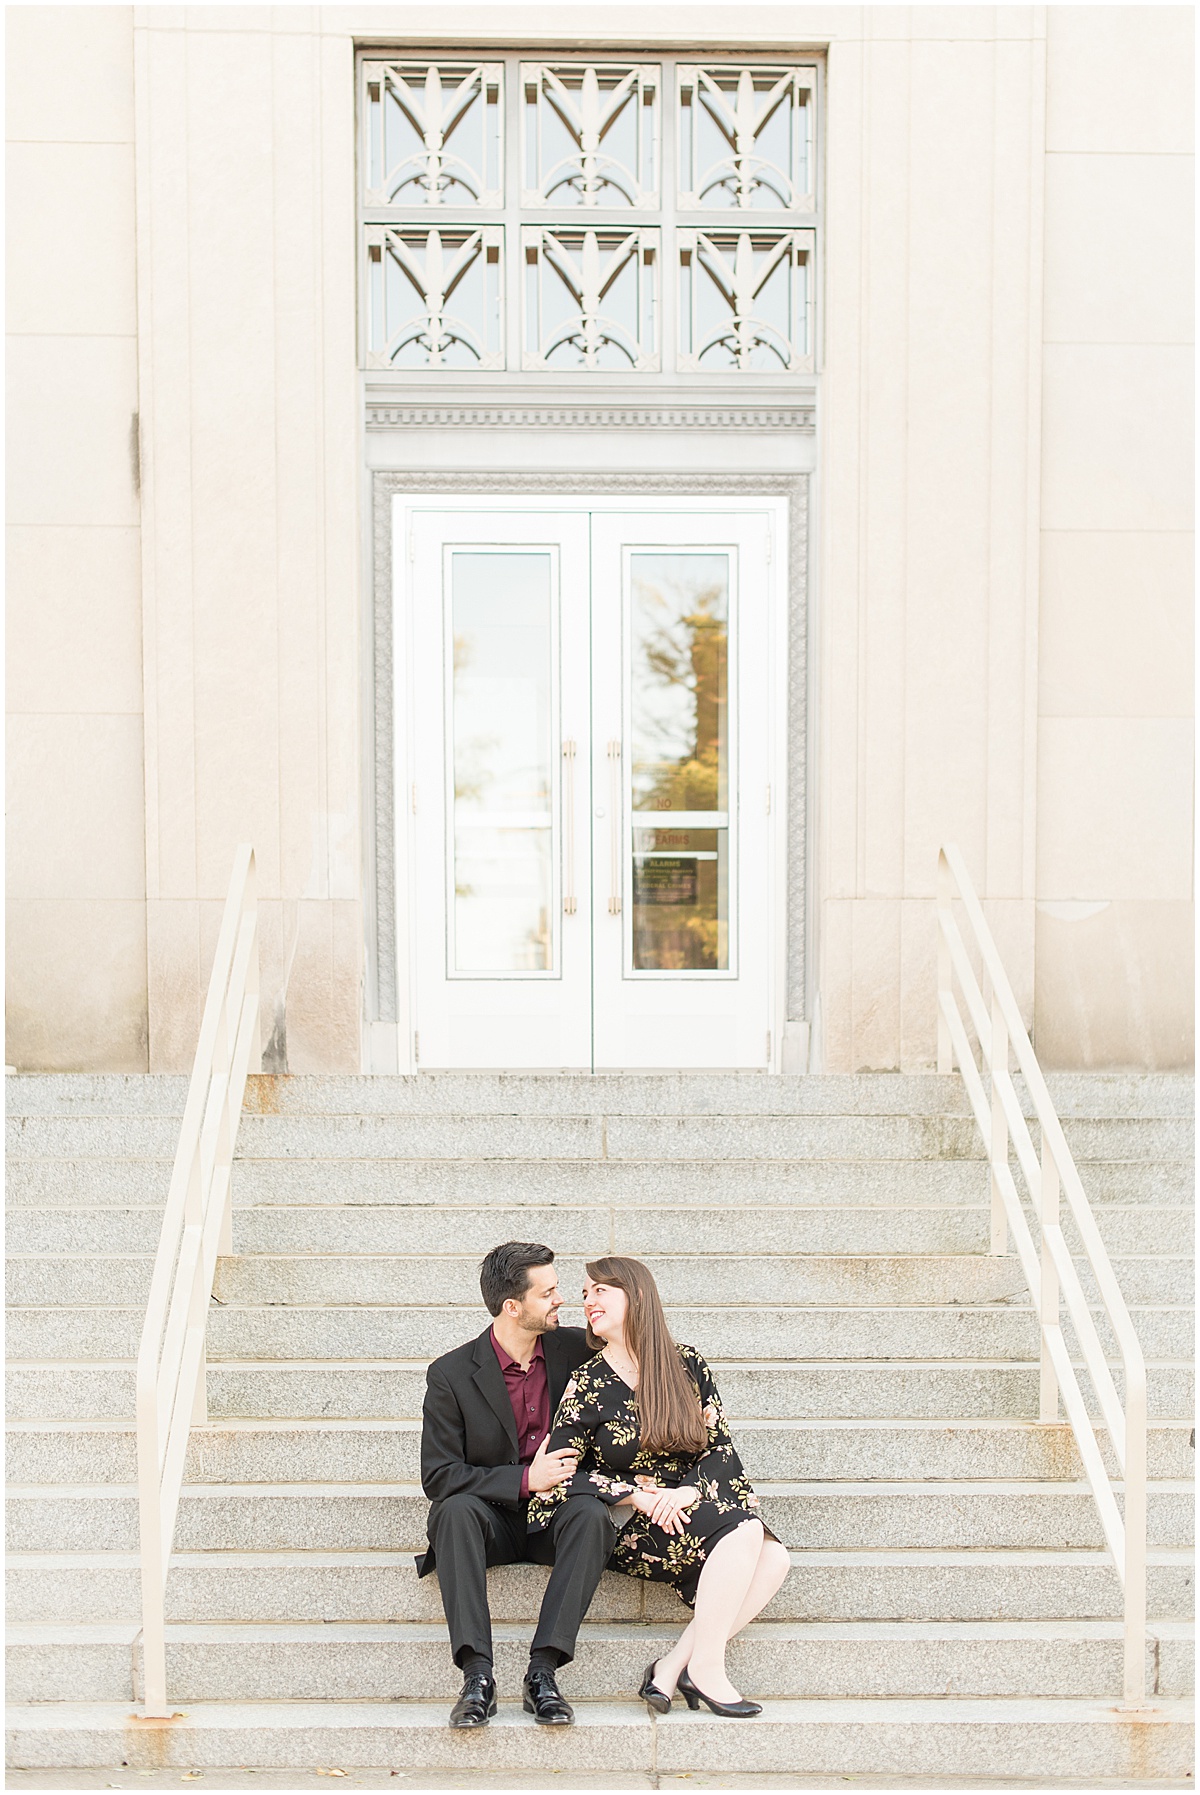 Nick Ballester and Madeline Pingel Engagement Session in Downtown Lafayette Indiana23.jpg